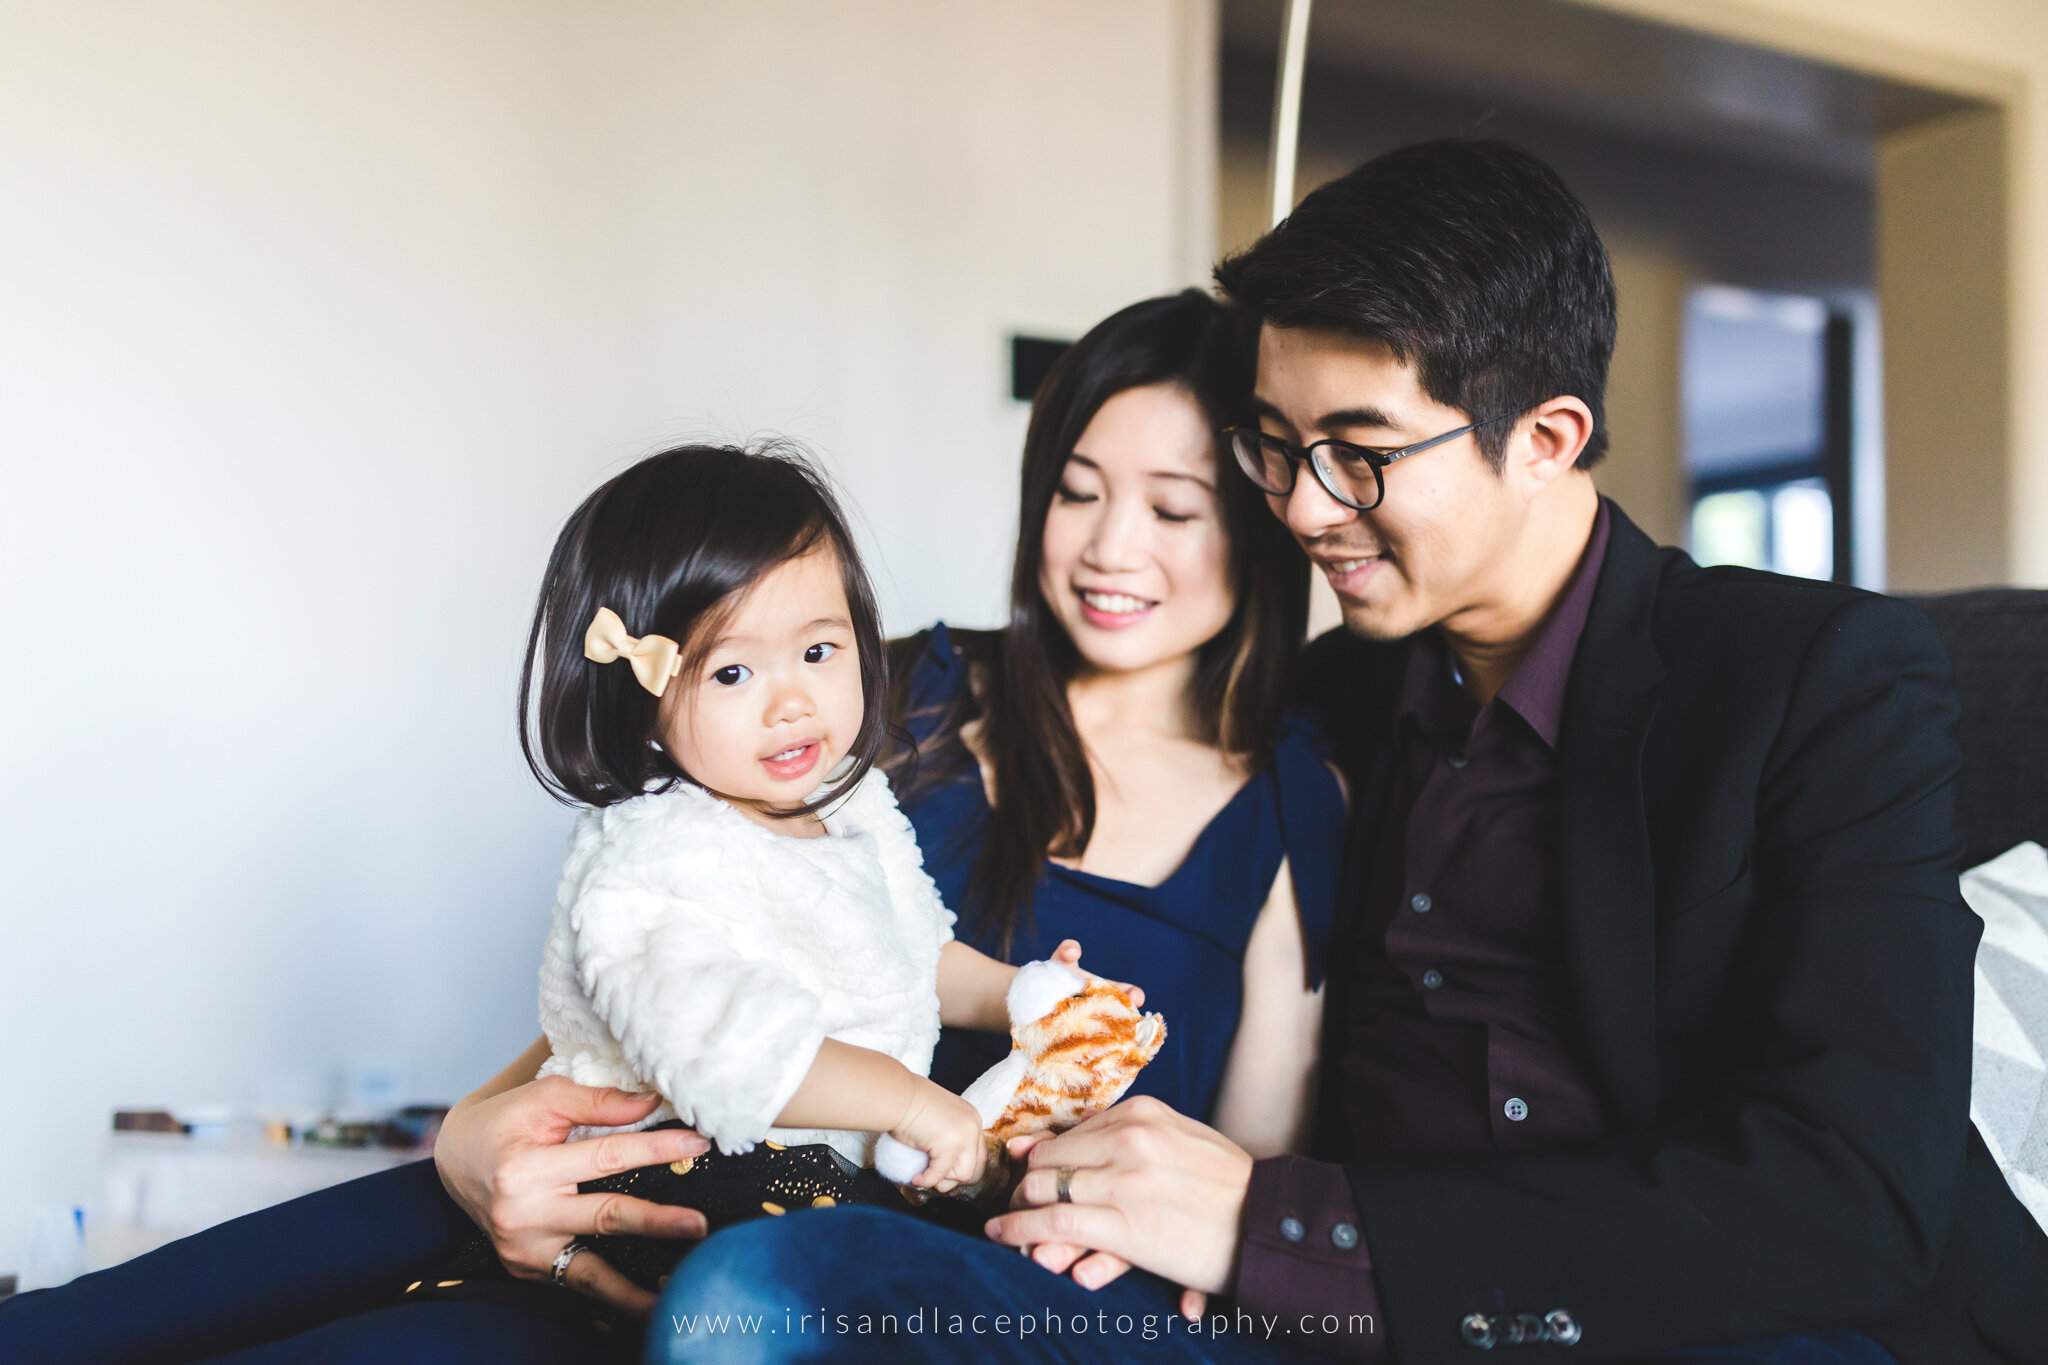 Lifestyle Photos in Silicon Valley Home  |  Iris and Lace Photography  |  SF Bay Area Photographer